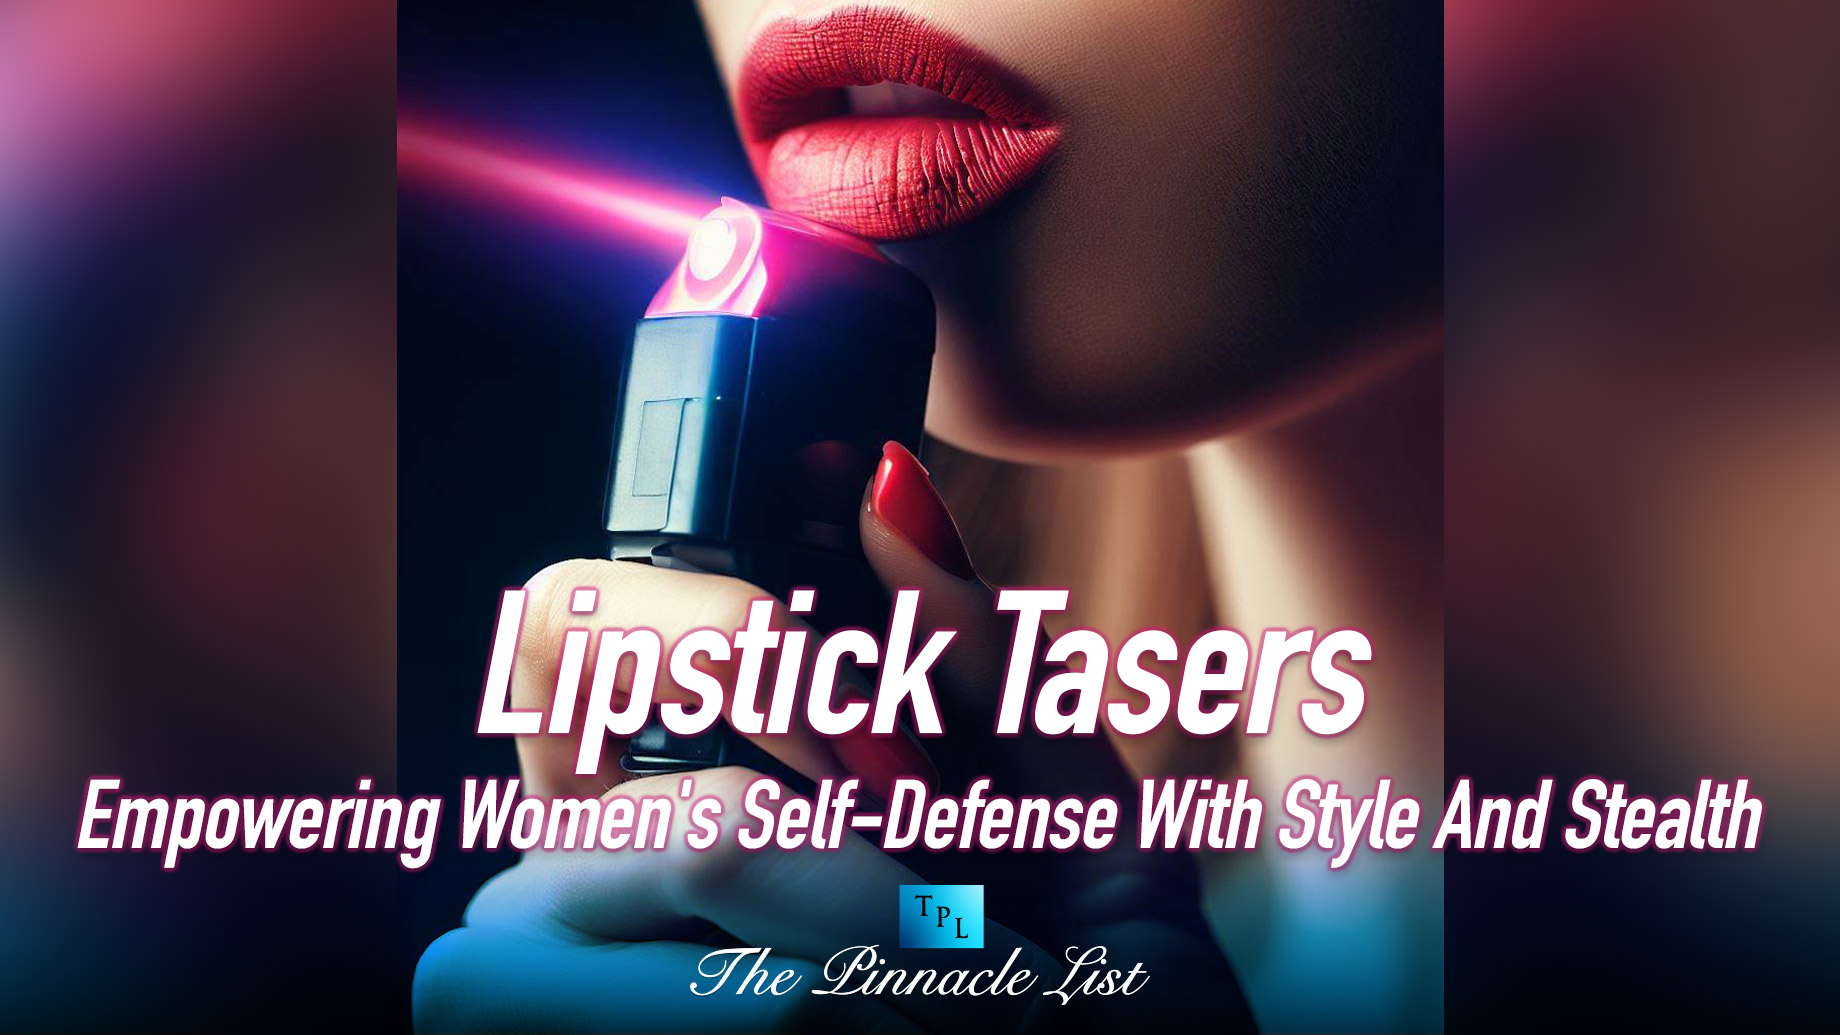 Lipstick Tasers: Empowering Women's Self-Defense With Style And Stealth